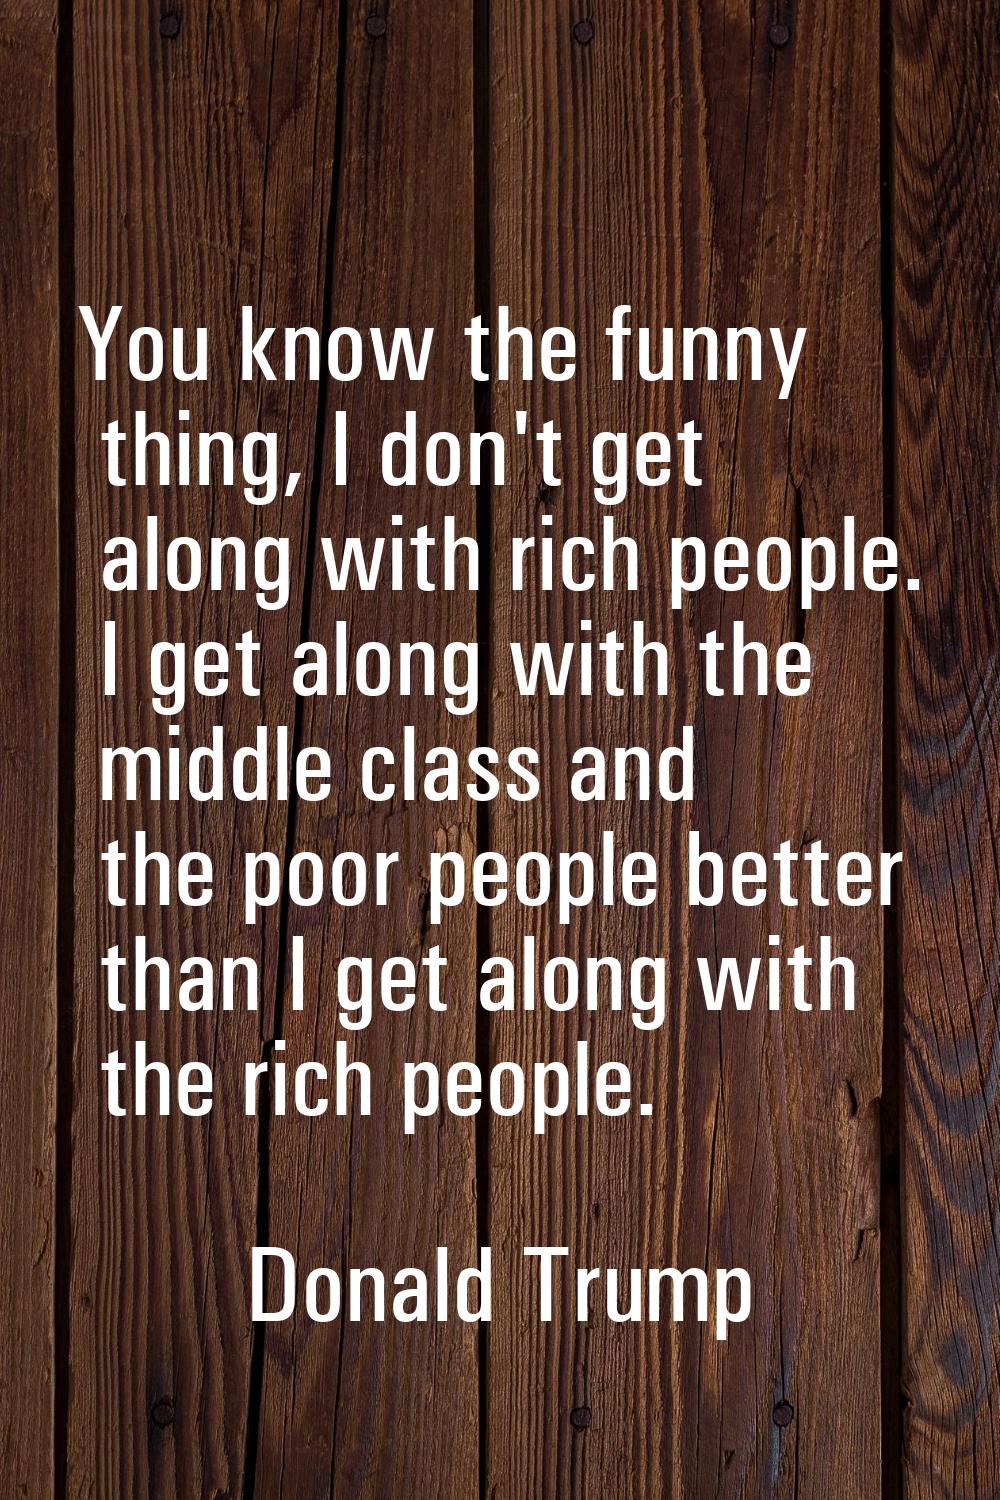 You know the funny thing, I don't get along with rich people. I get along with the middle class and